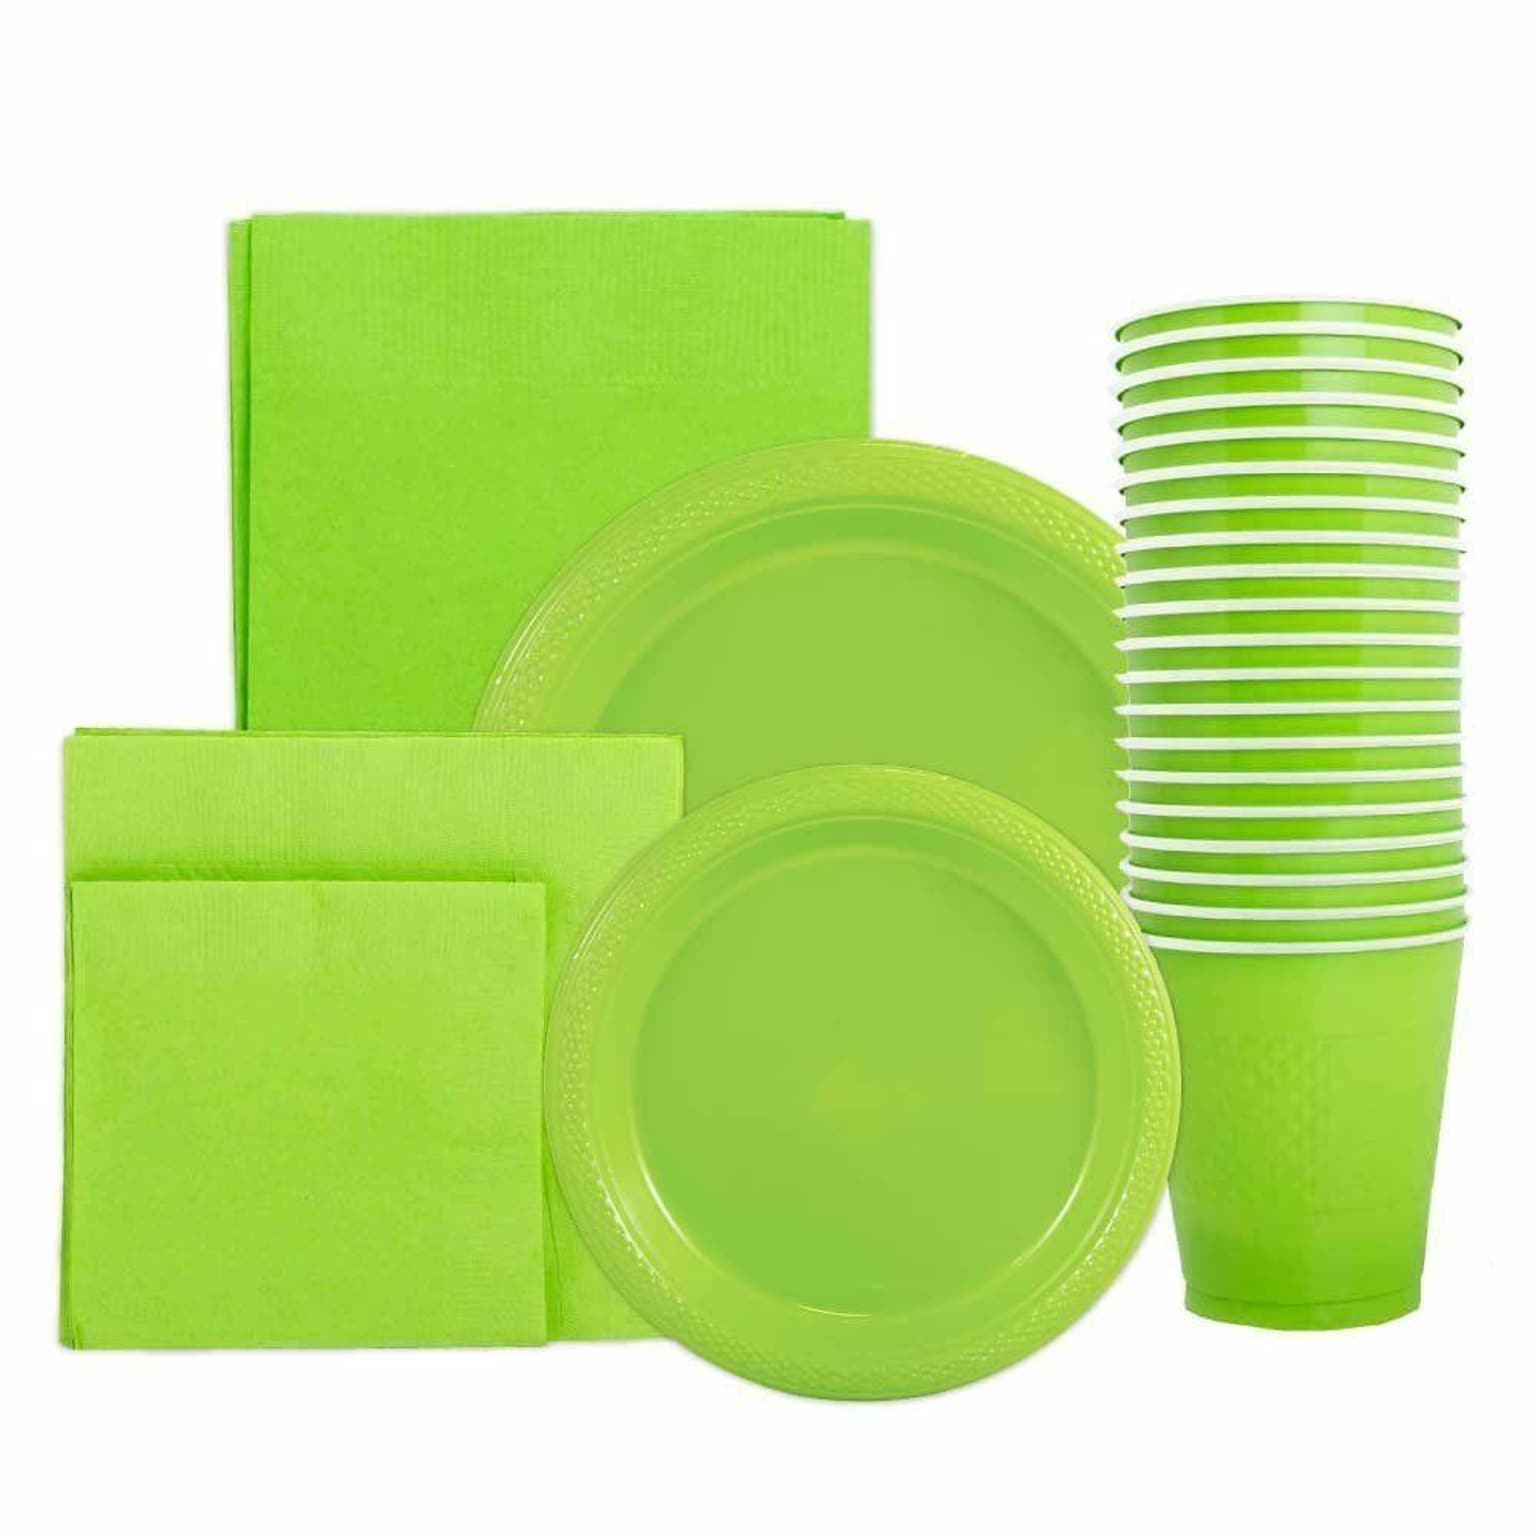 JAM PAPER Party Supply Assortment, Lime Green, Plates, Napkins, Cups & Tablecloth, 6/Pack (255PPGRES)